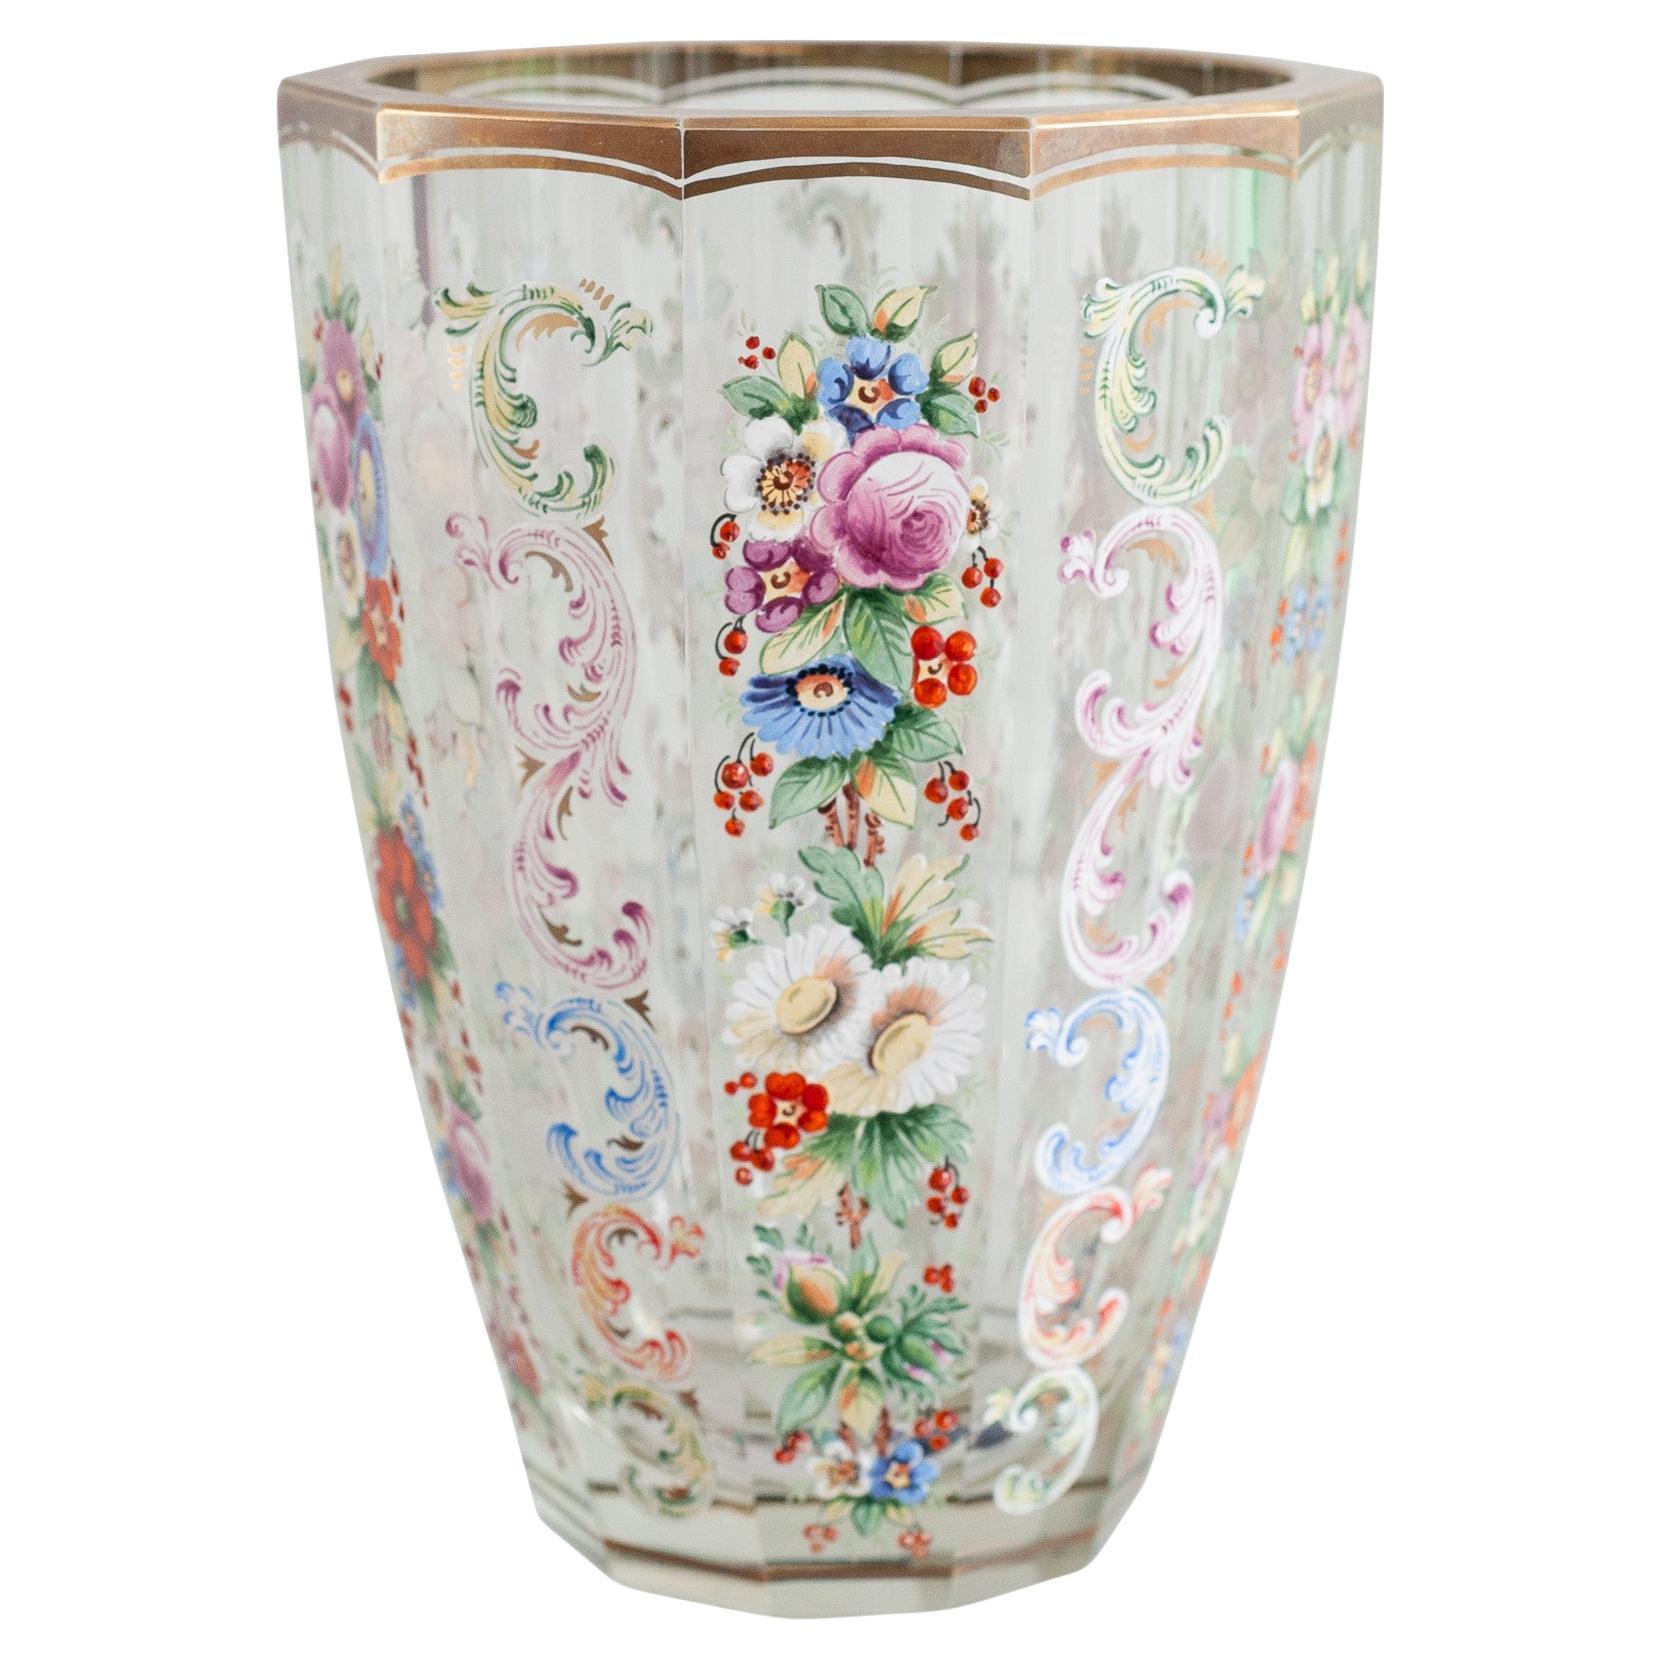 Antique Moser Multicolored Hand Painted Floral and Gilt Vase For Sale